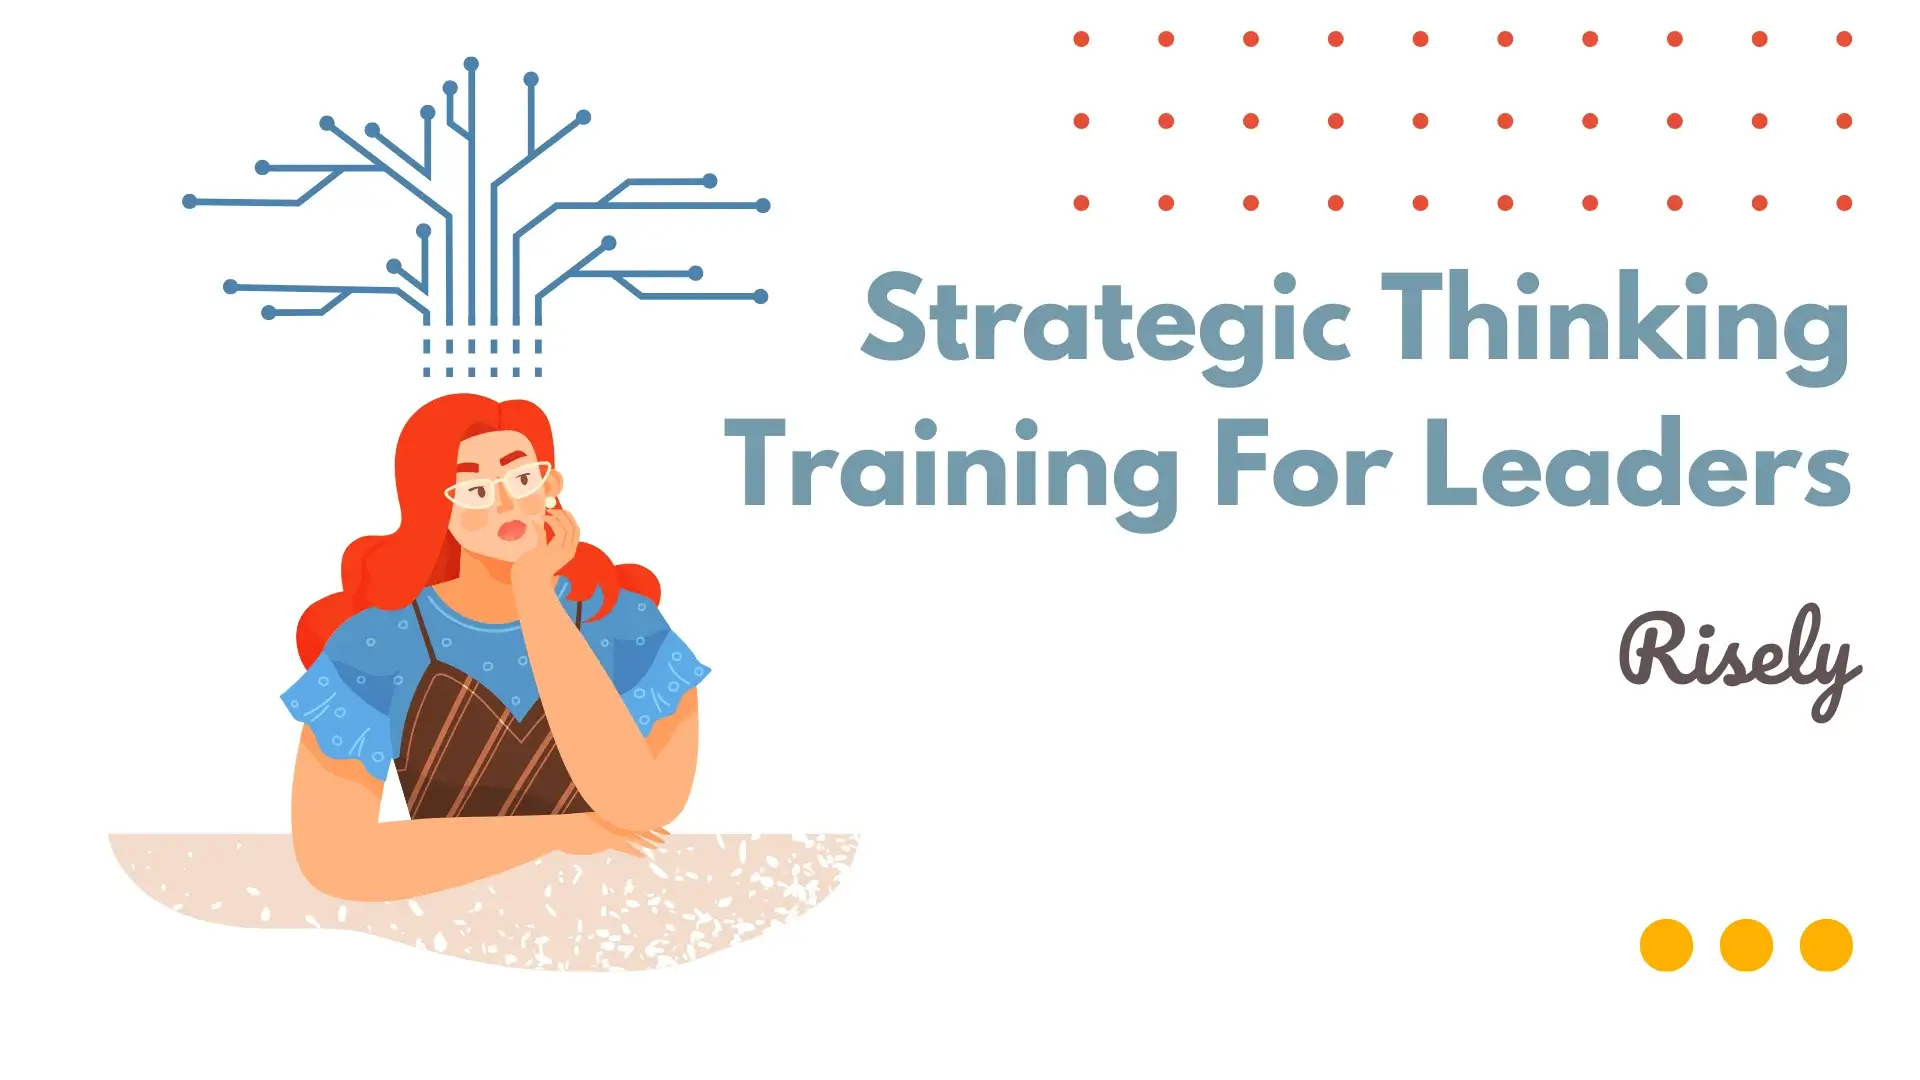 Strategic Thinking Training For Leaders Simplified